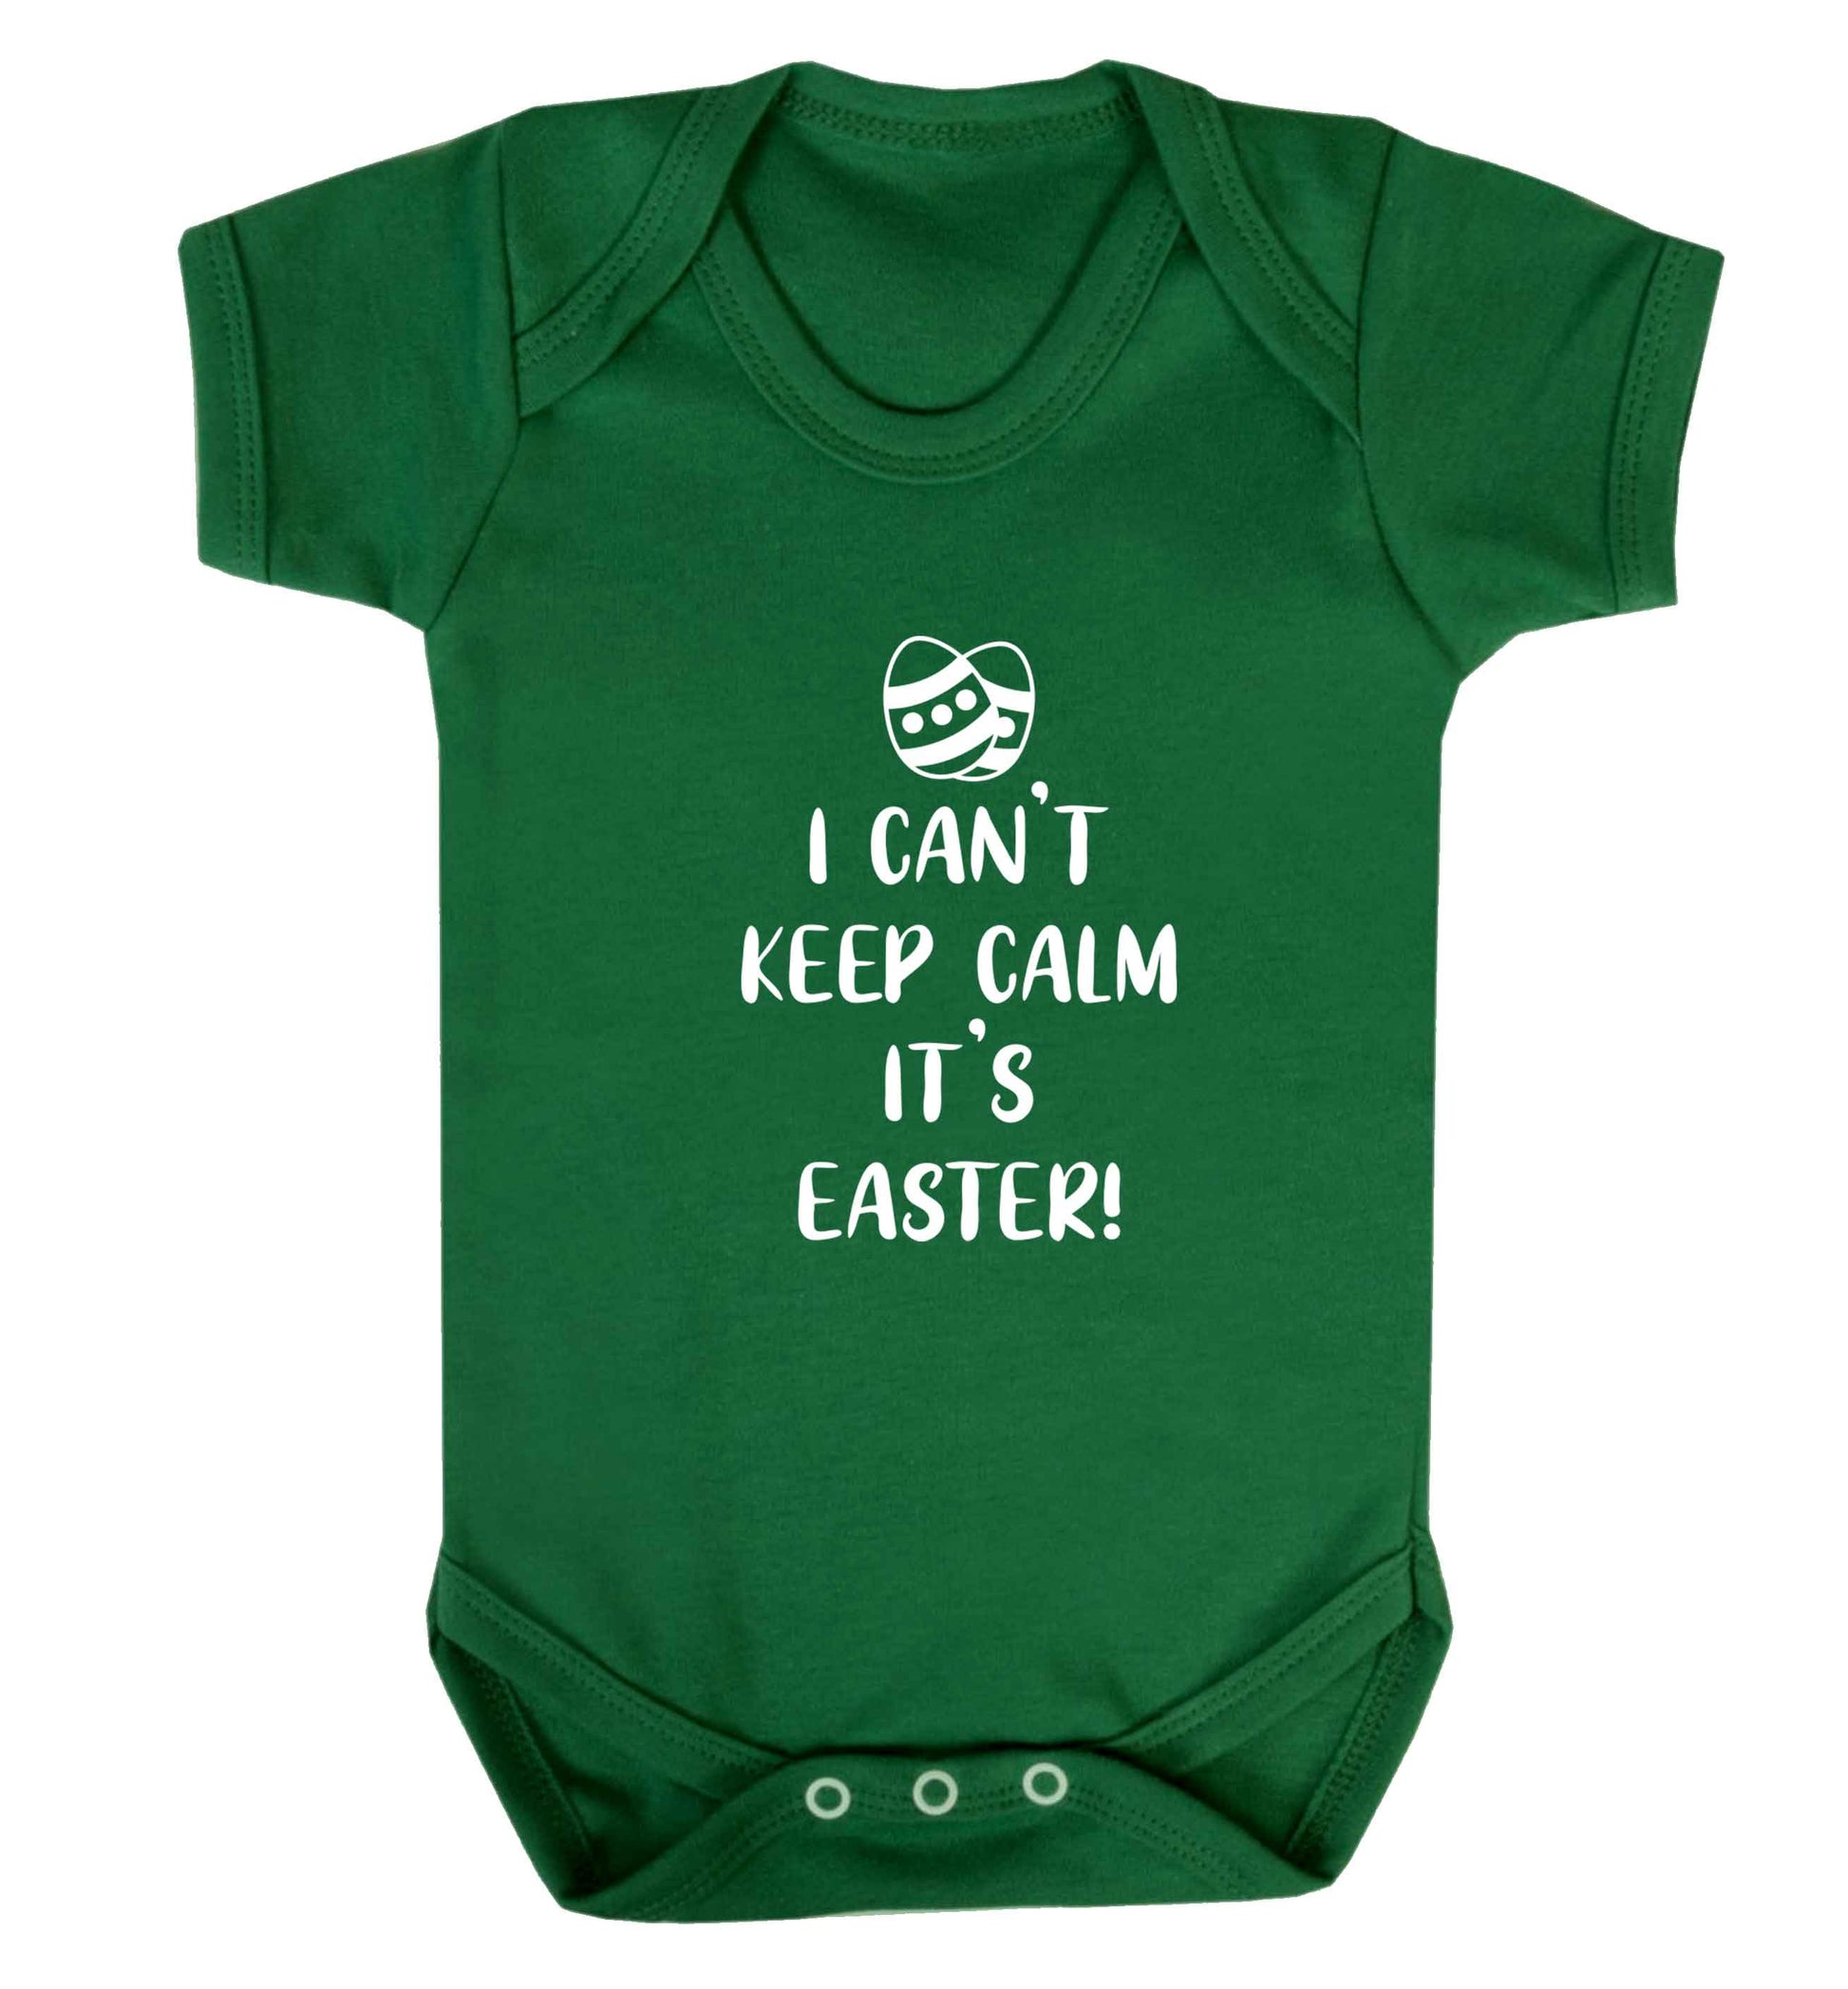 I can't keep calm it's Easter baby vest green 18-24 months